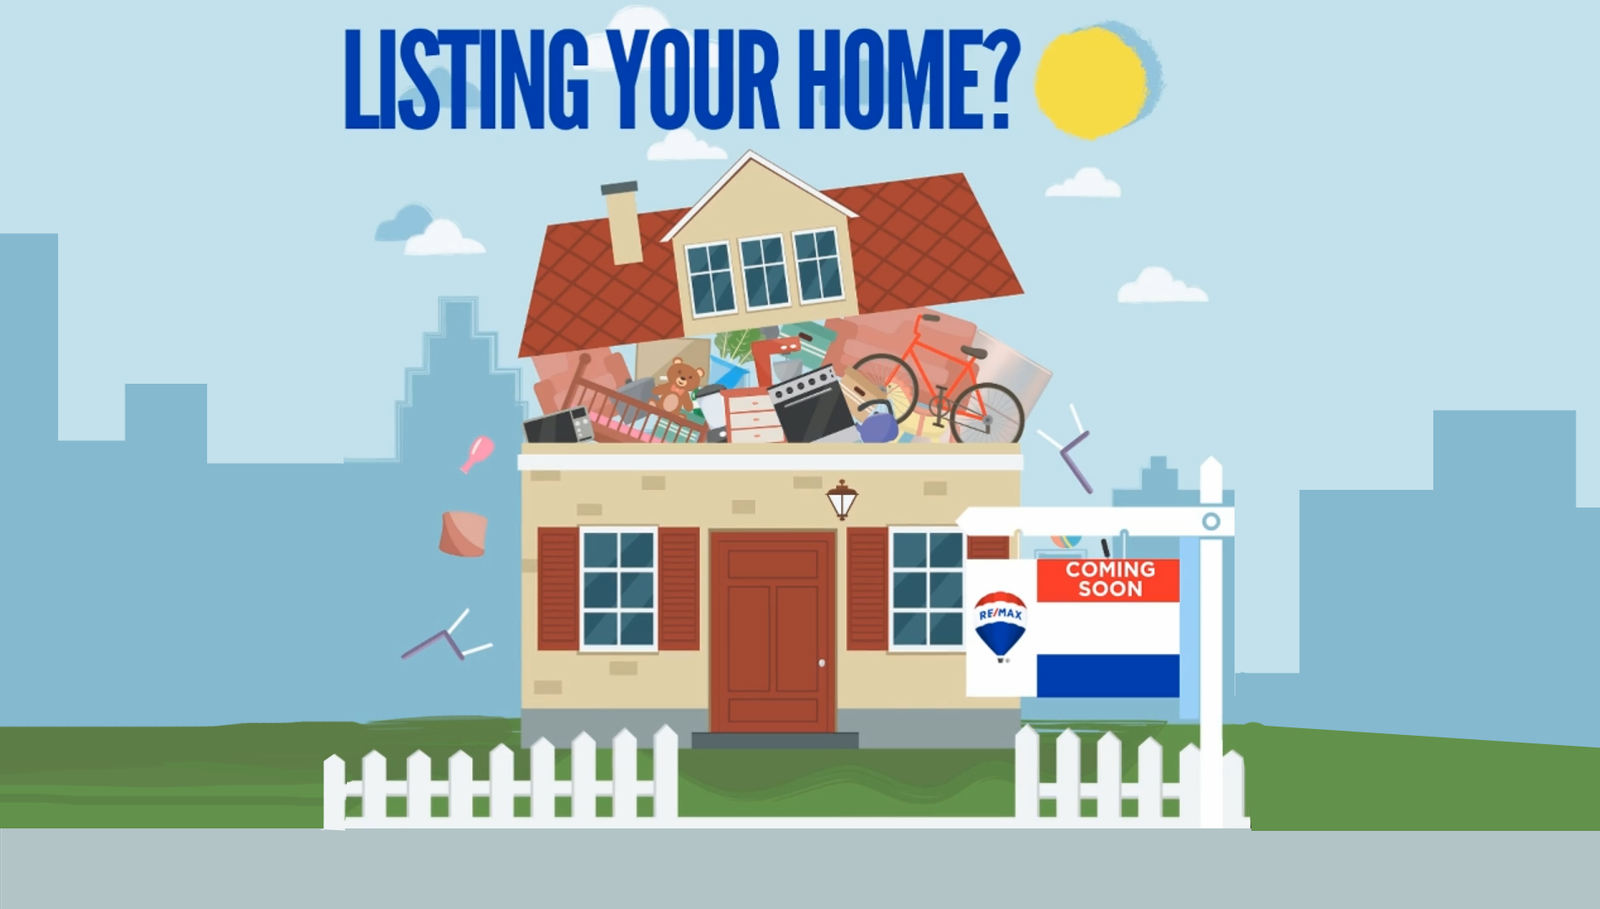 Tips for Getting Your Home Ready to Sell!